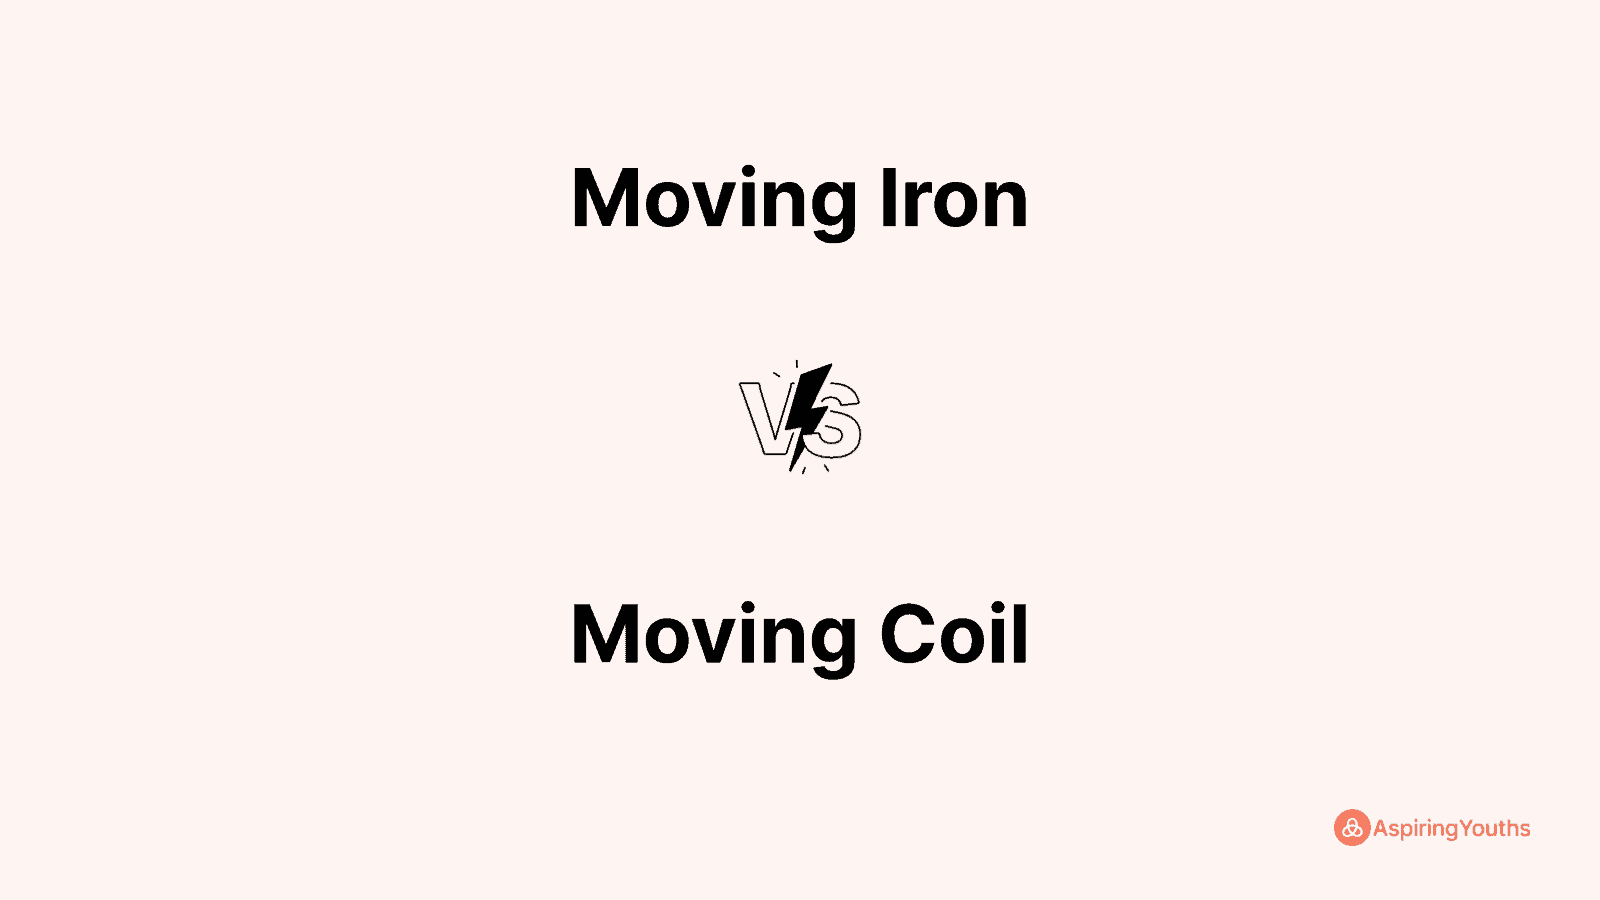 Moving Iron vs Moving Coil